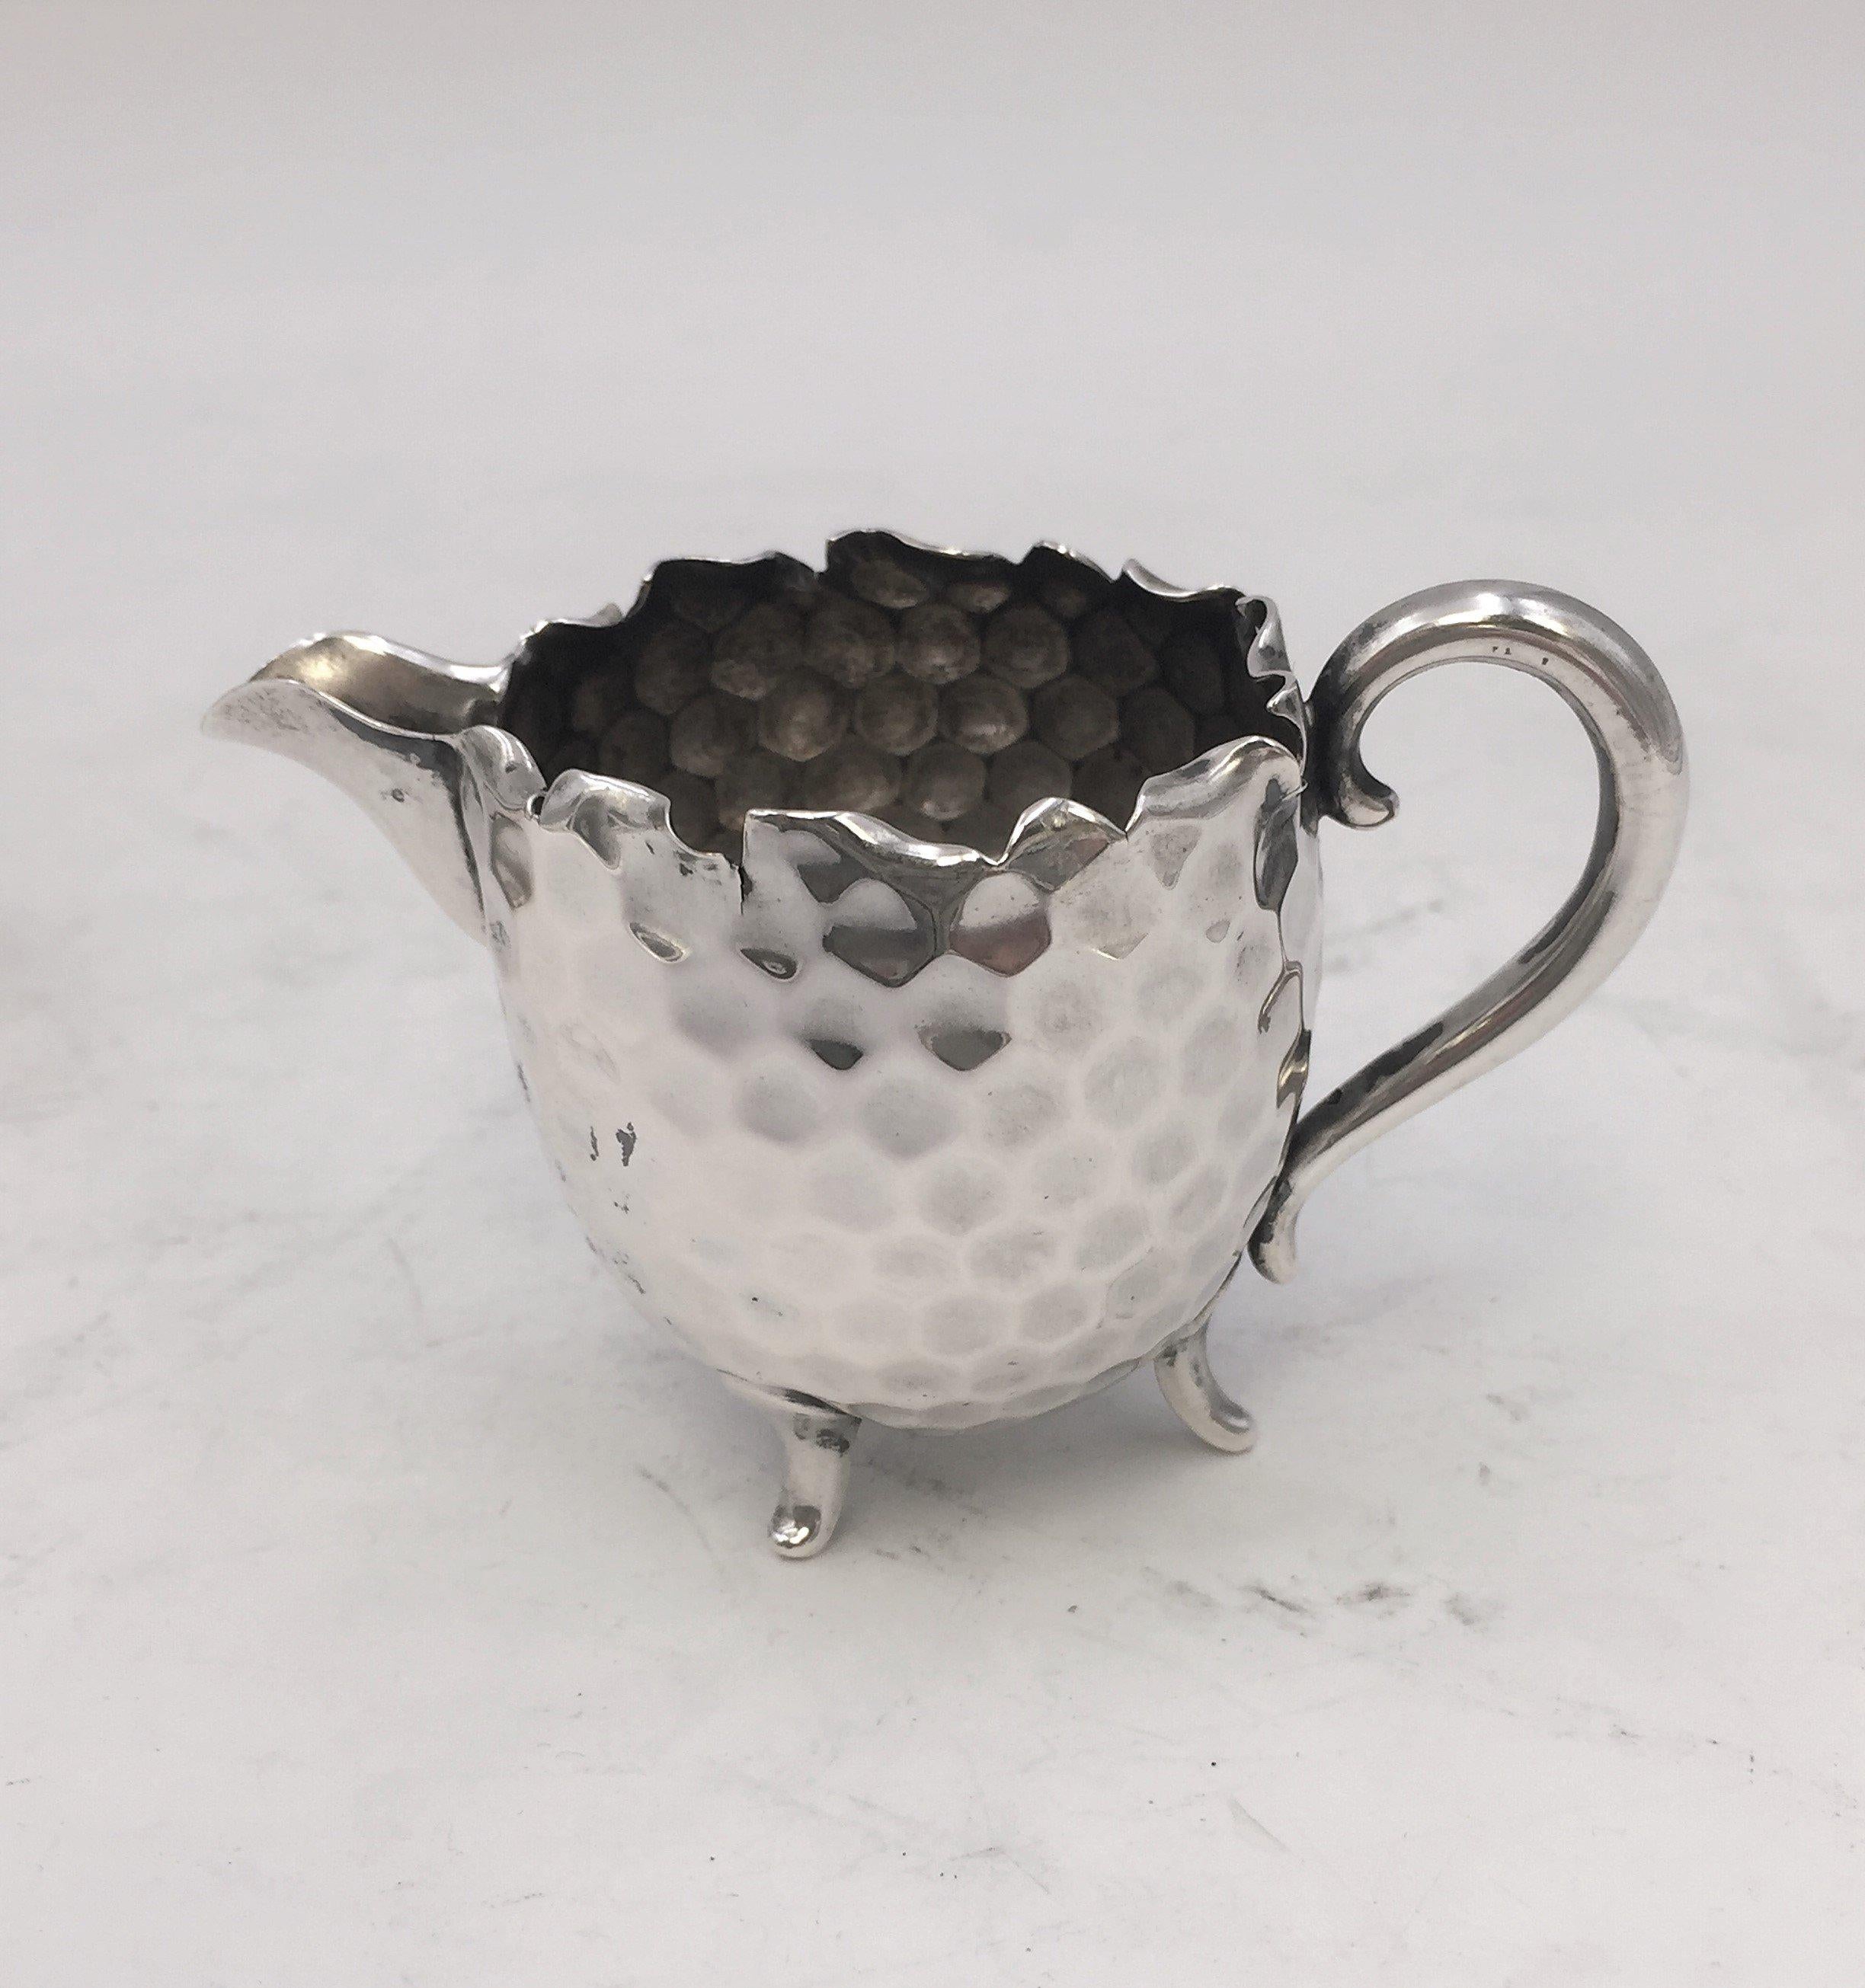 Hand hammered tea / coffee service in 800 silver by famed German silversmith Hugo Böhm in modernist Bauhaus style consisting of:

Pot, 6'' from arm to spout and 5'' high
Sugar bowl, 5'' in width and 1 2/3'' in height
Creamer 3 1/4'' from arm to